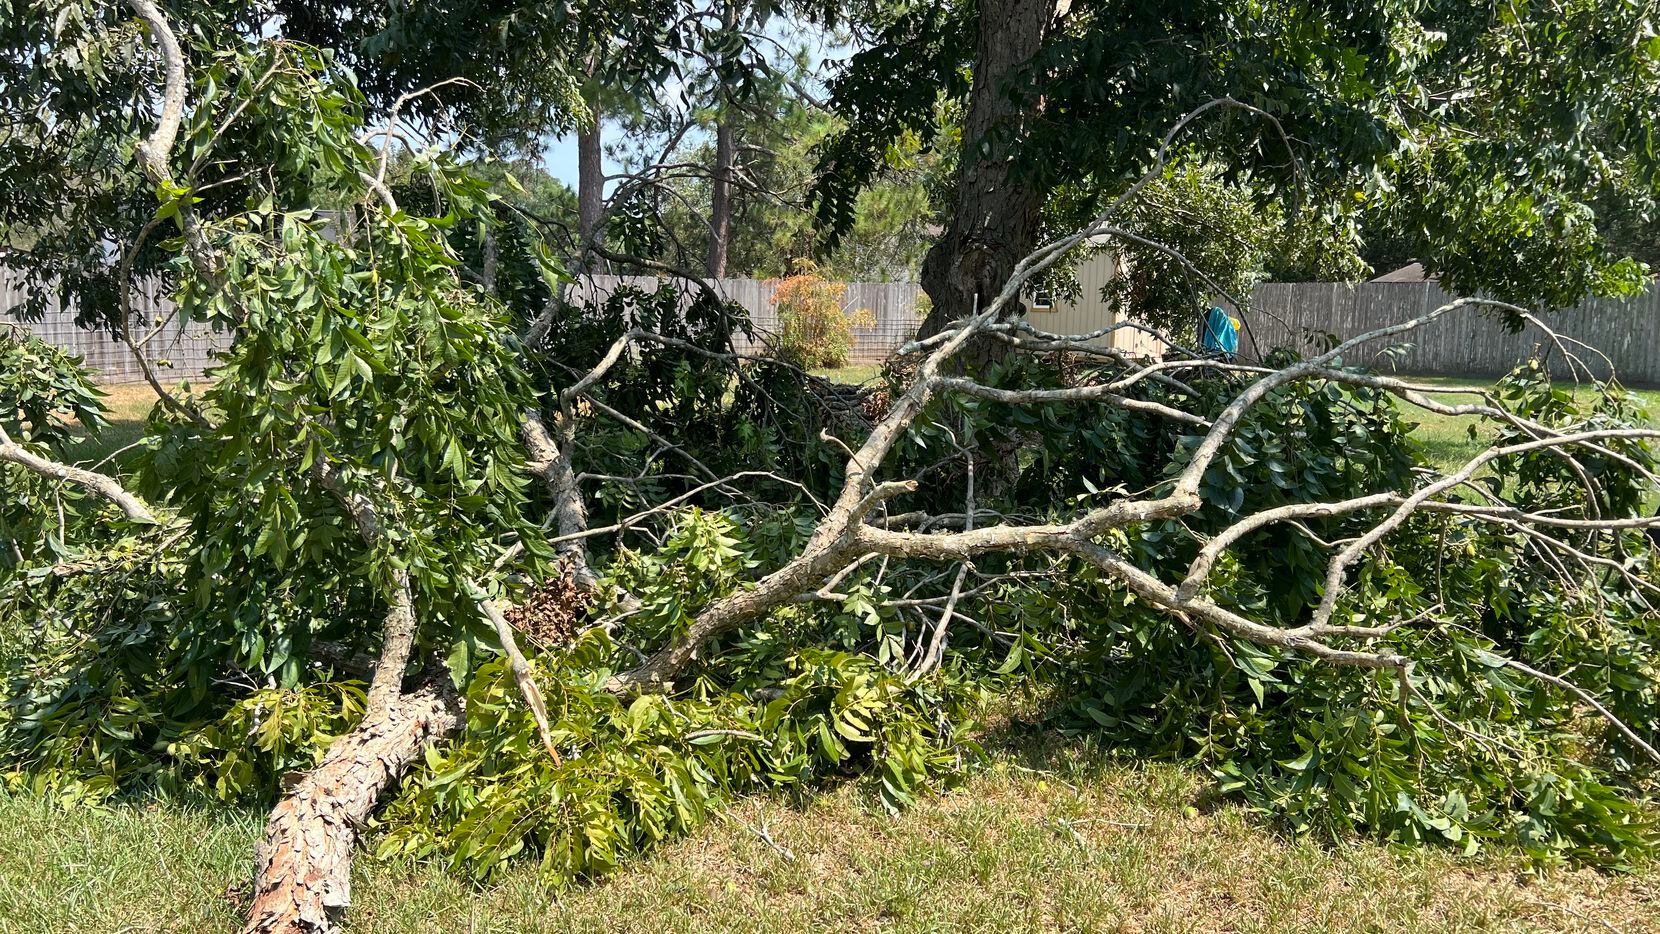 Large limbs have been falling off trees across North Texas this summer. The phenomenon is...